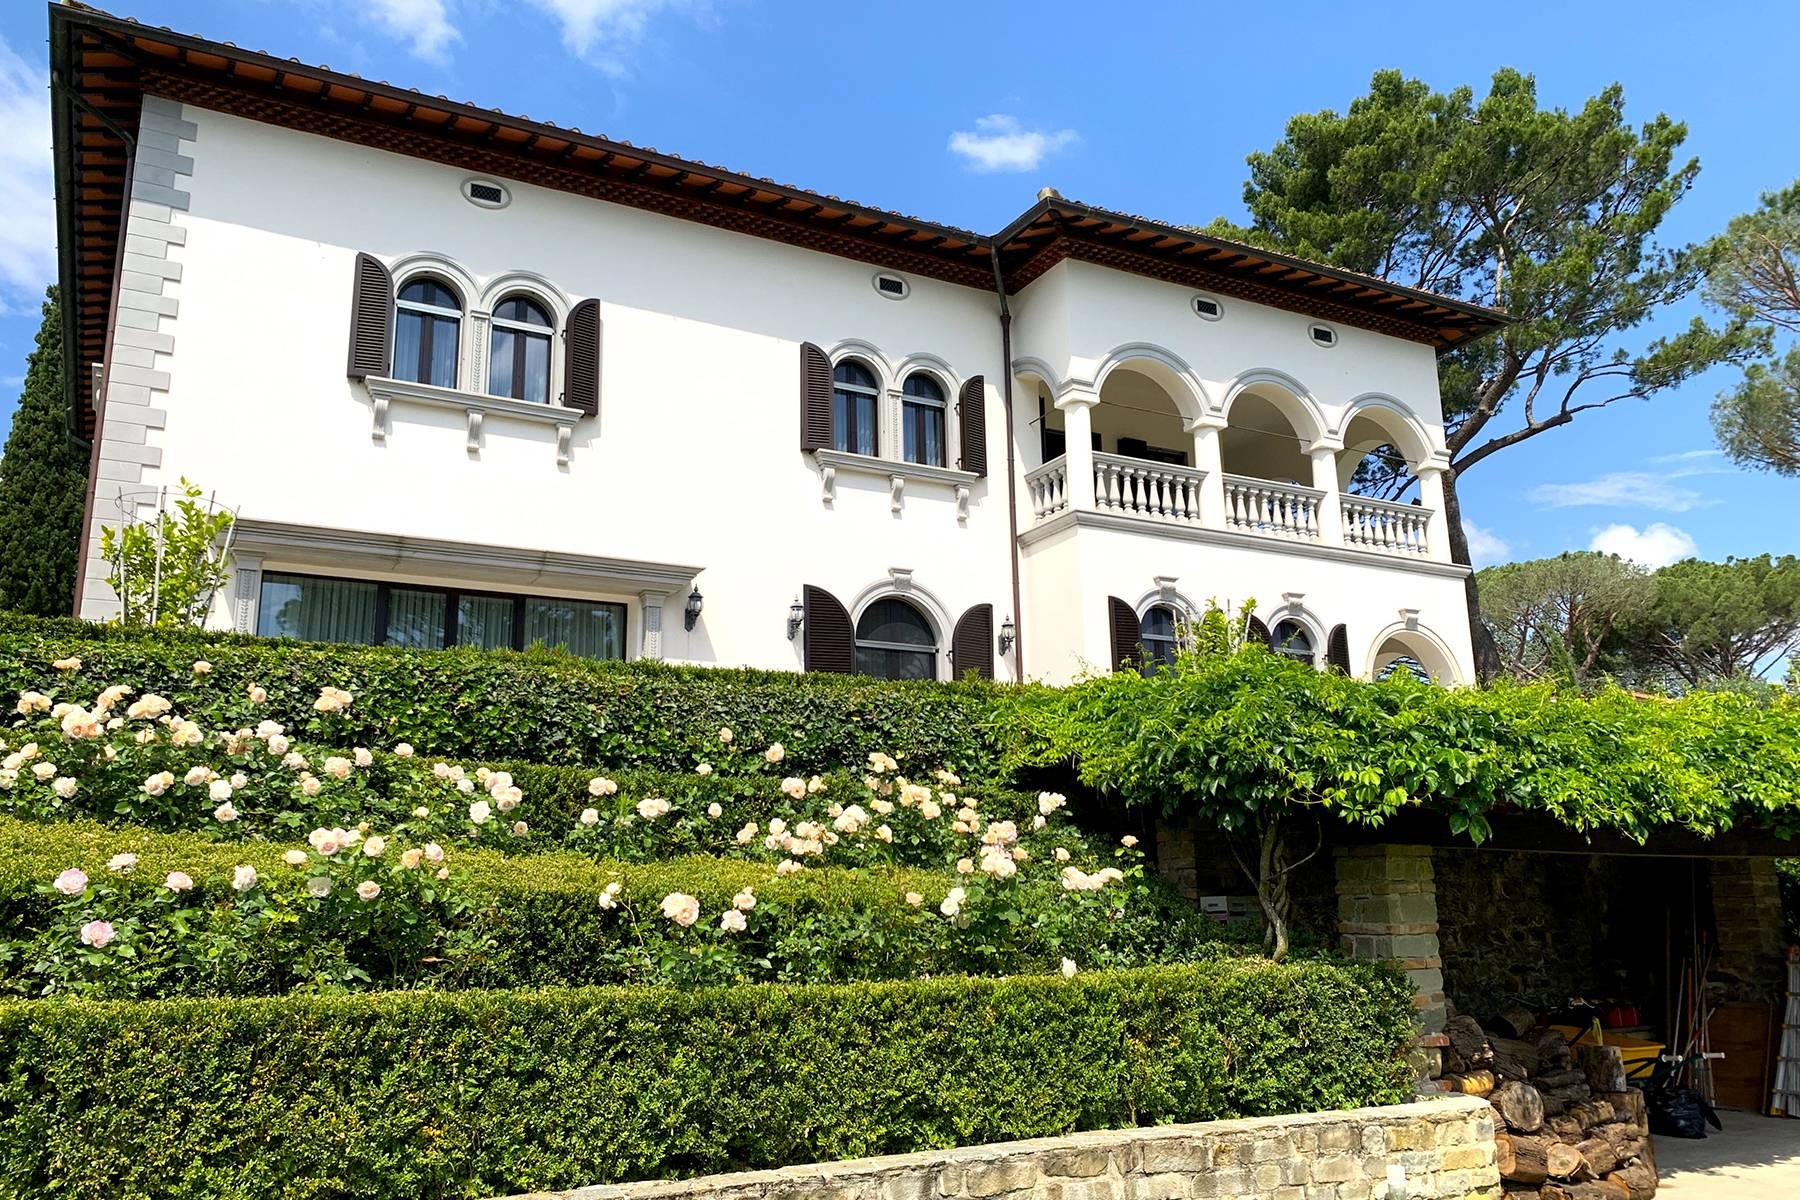 Splendid villa with pool on the Poggio Imperiale hill in Florence - 12